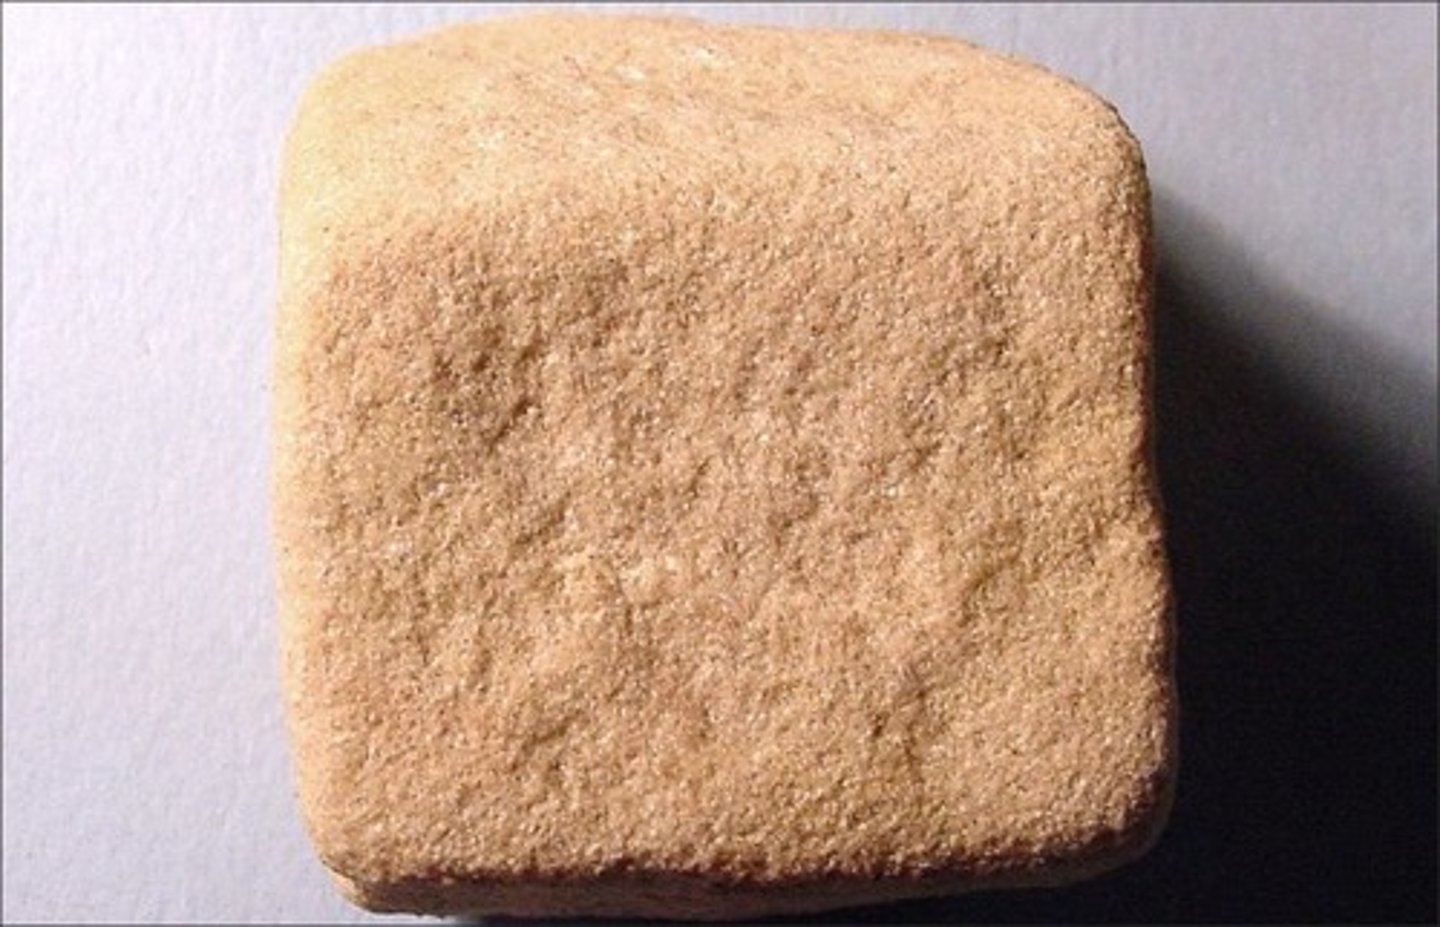 <p>Sedimentary rock made of sand-sized grains</p>